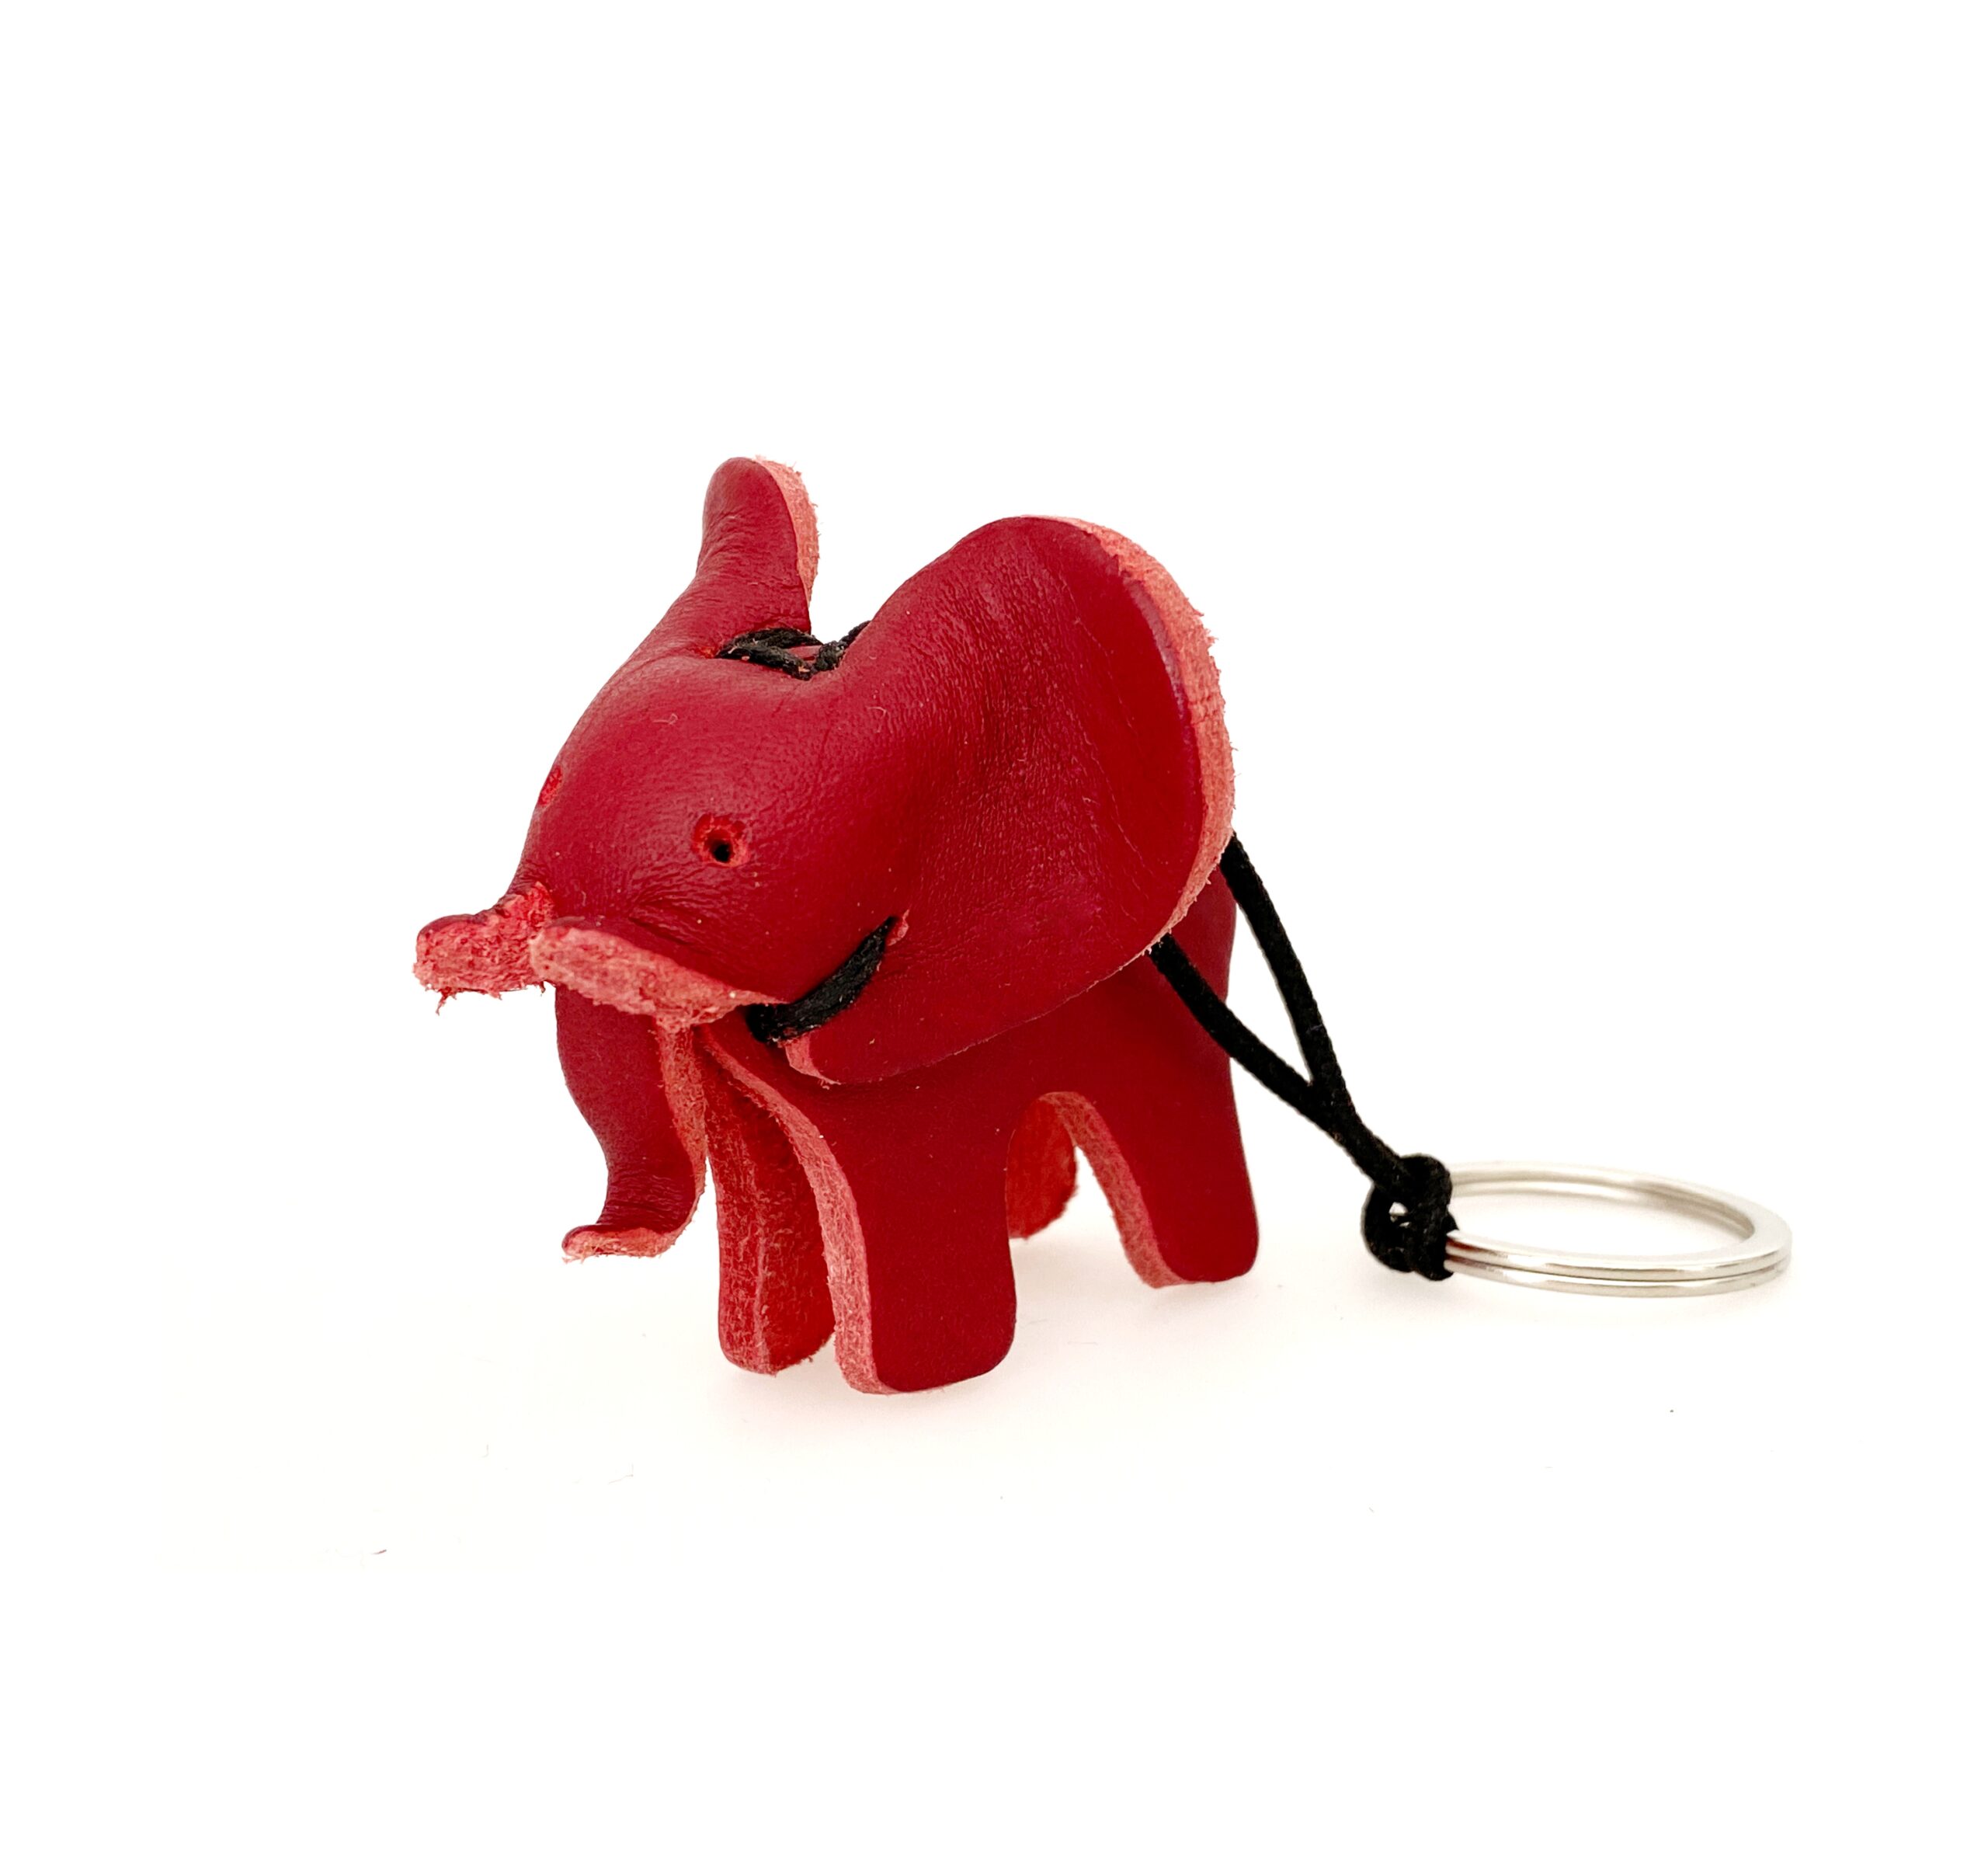 Leather Keyring Red